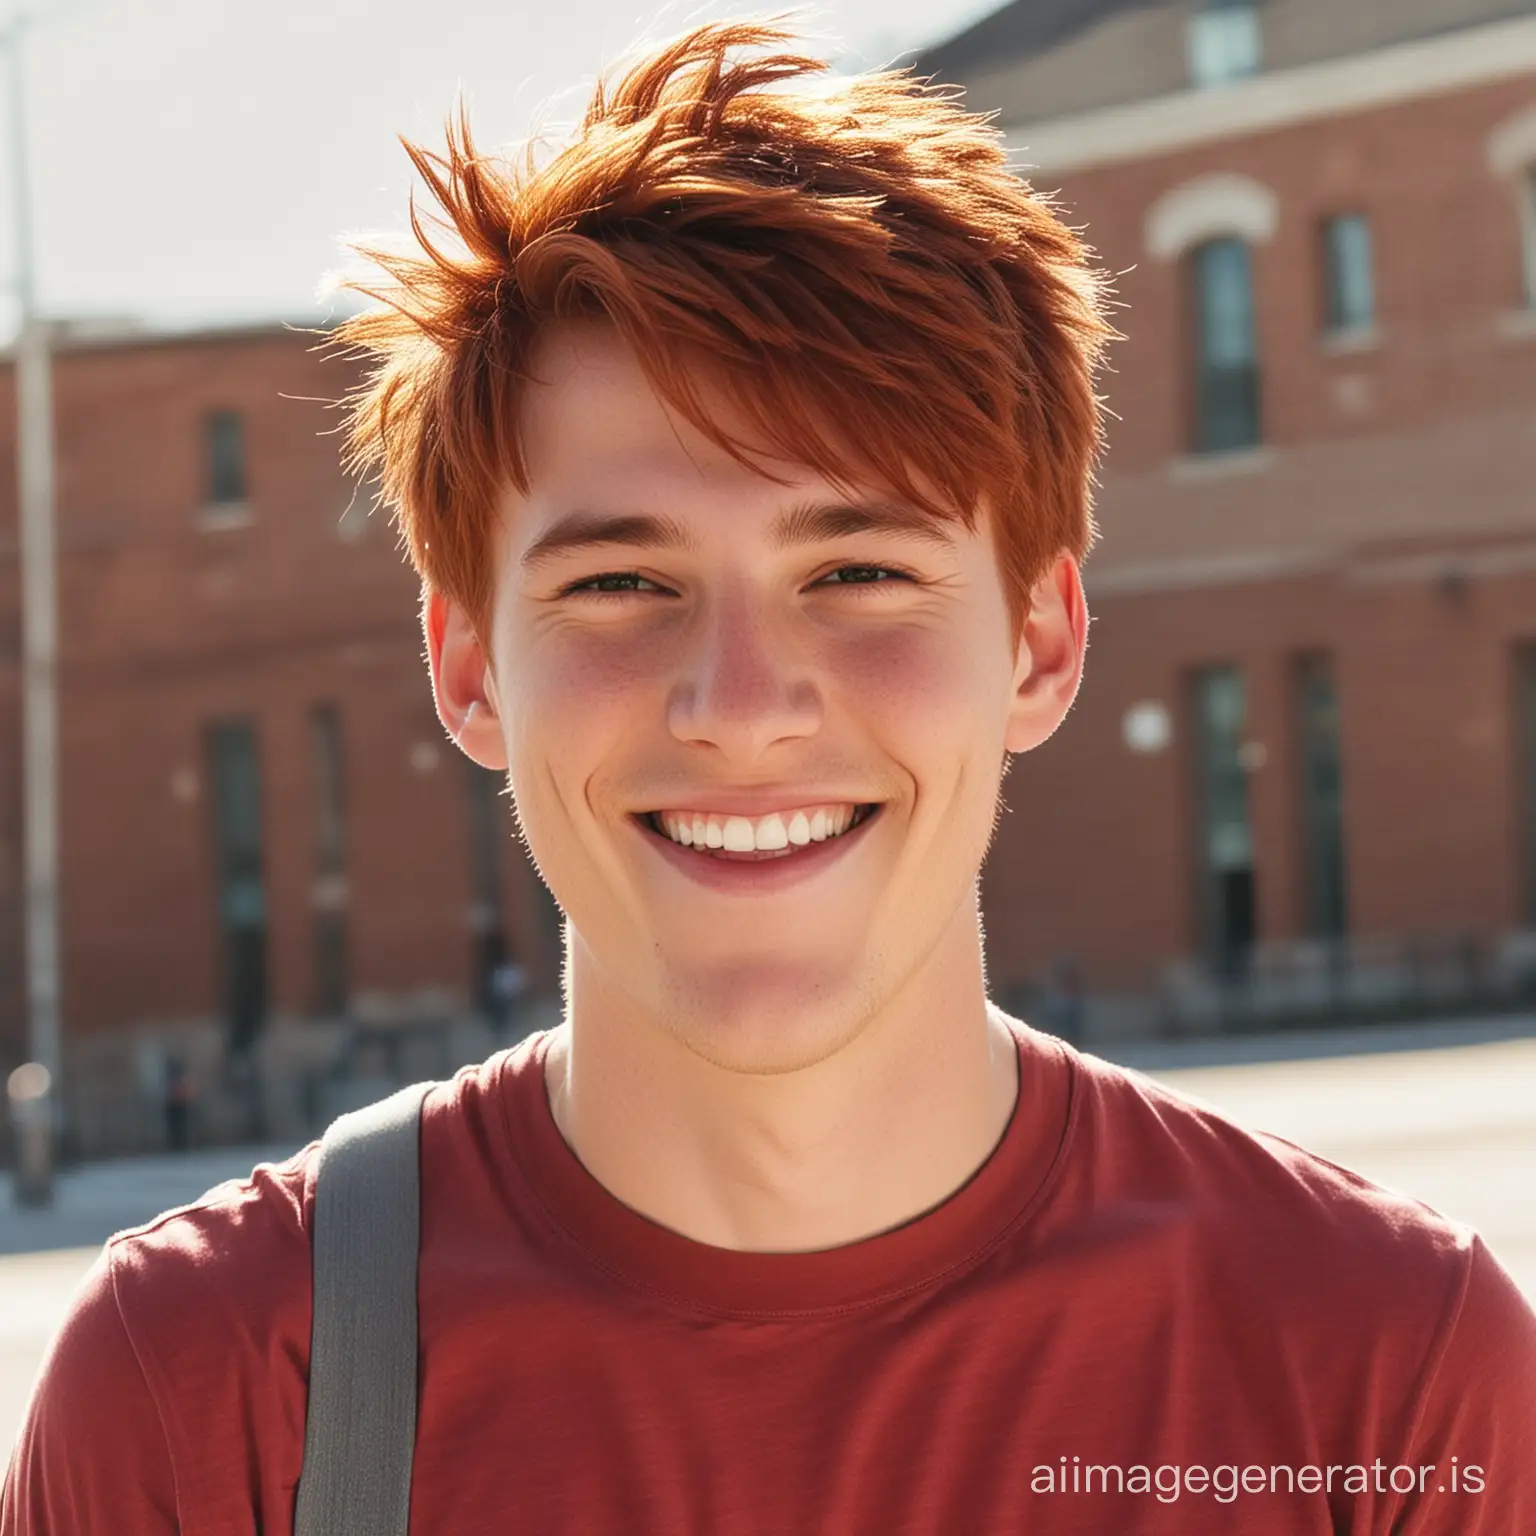 Smiling-RedHaired-College-Student-in-Casual-Wear-Enjoying-Sunny-Day